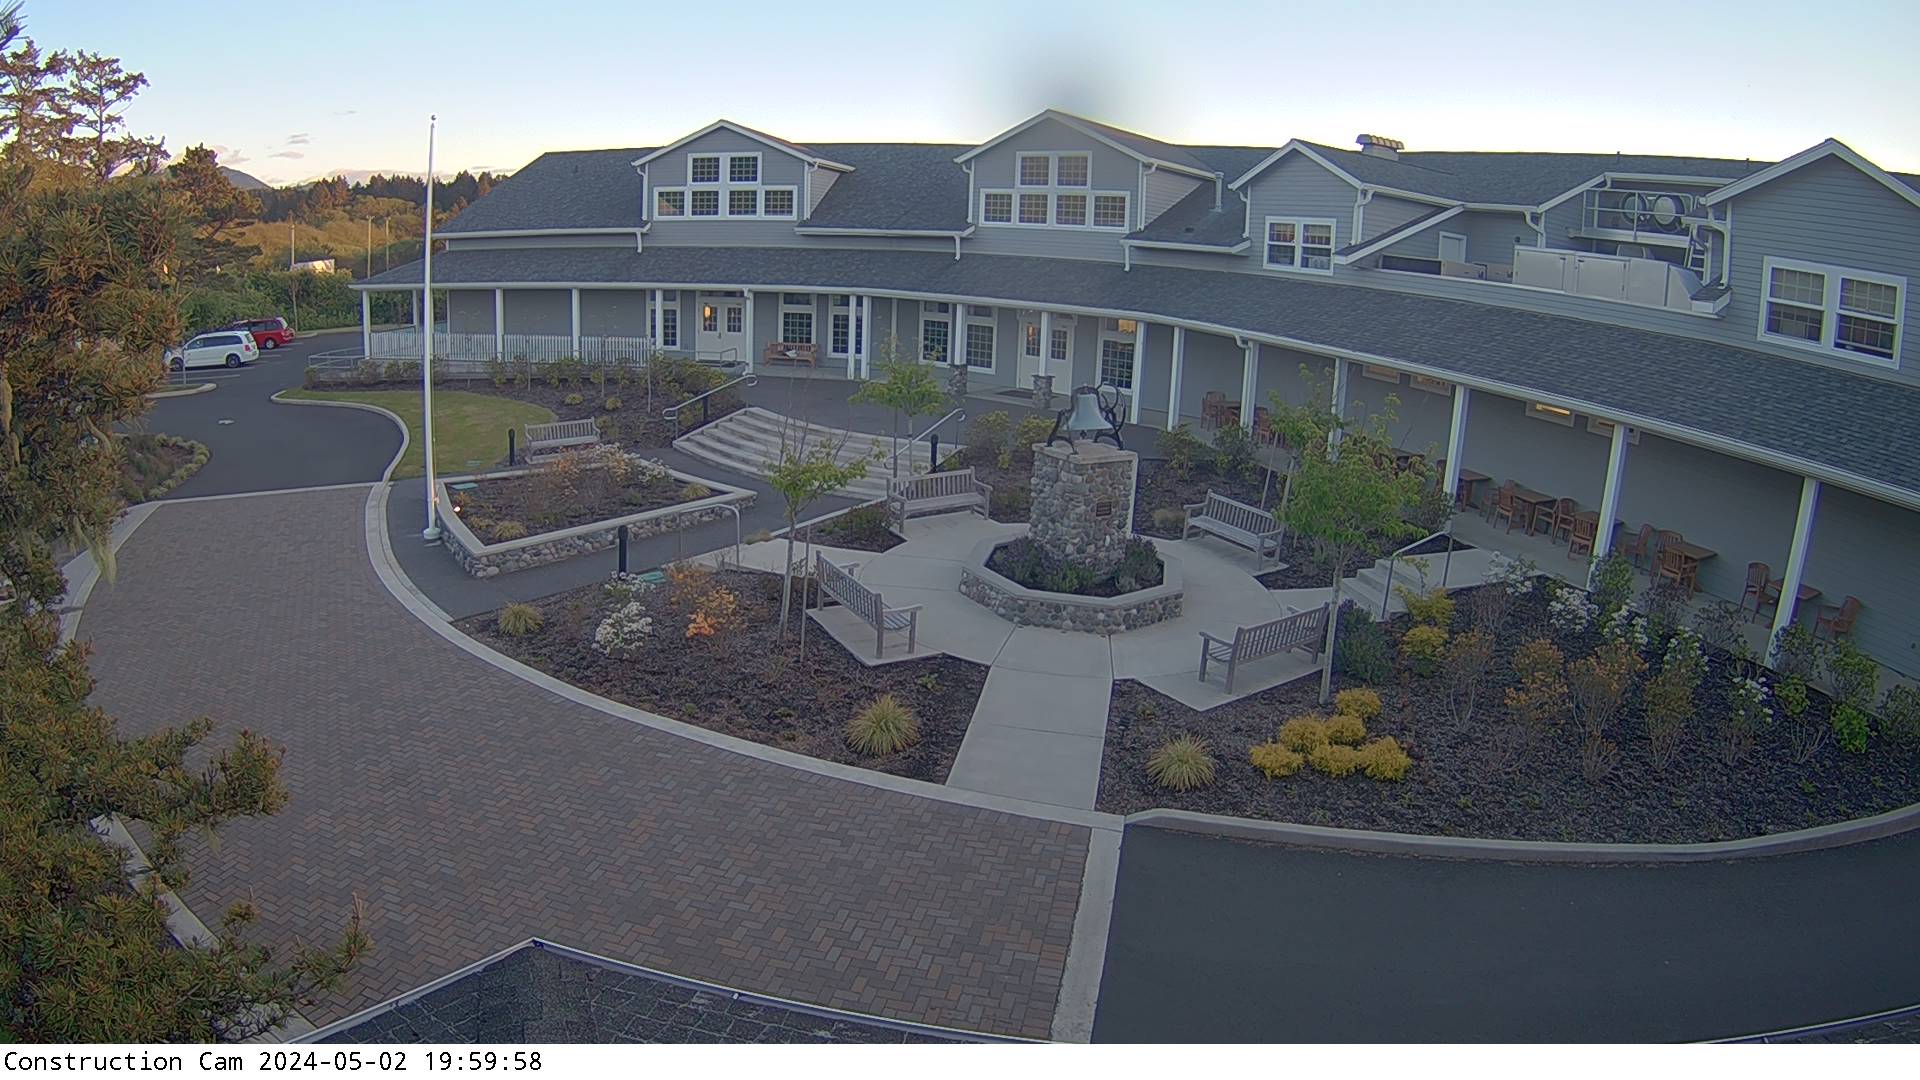 USA Guesthouse on the Pacific coast live camera